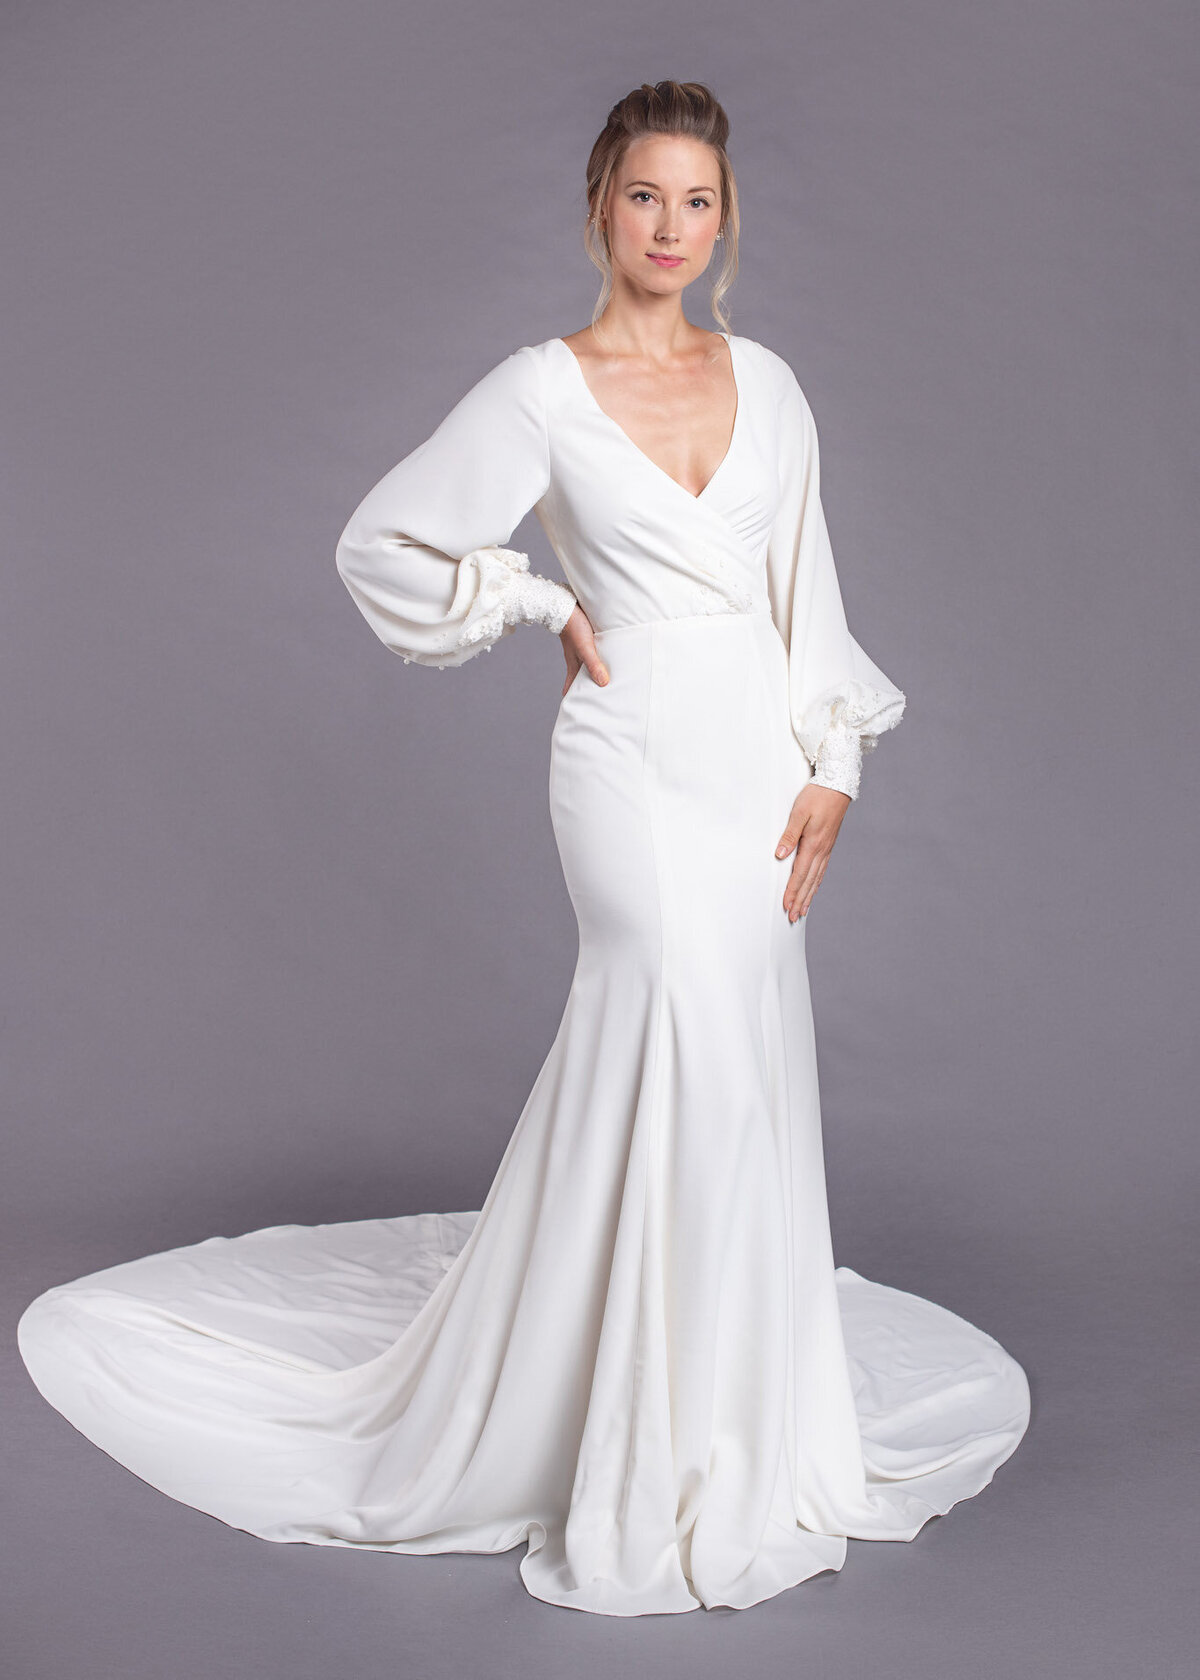 The Milly bridal style by indie designer Edith Elan is a full bishop sleeve wedding dress in a fit-and-flare silhouette.